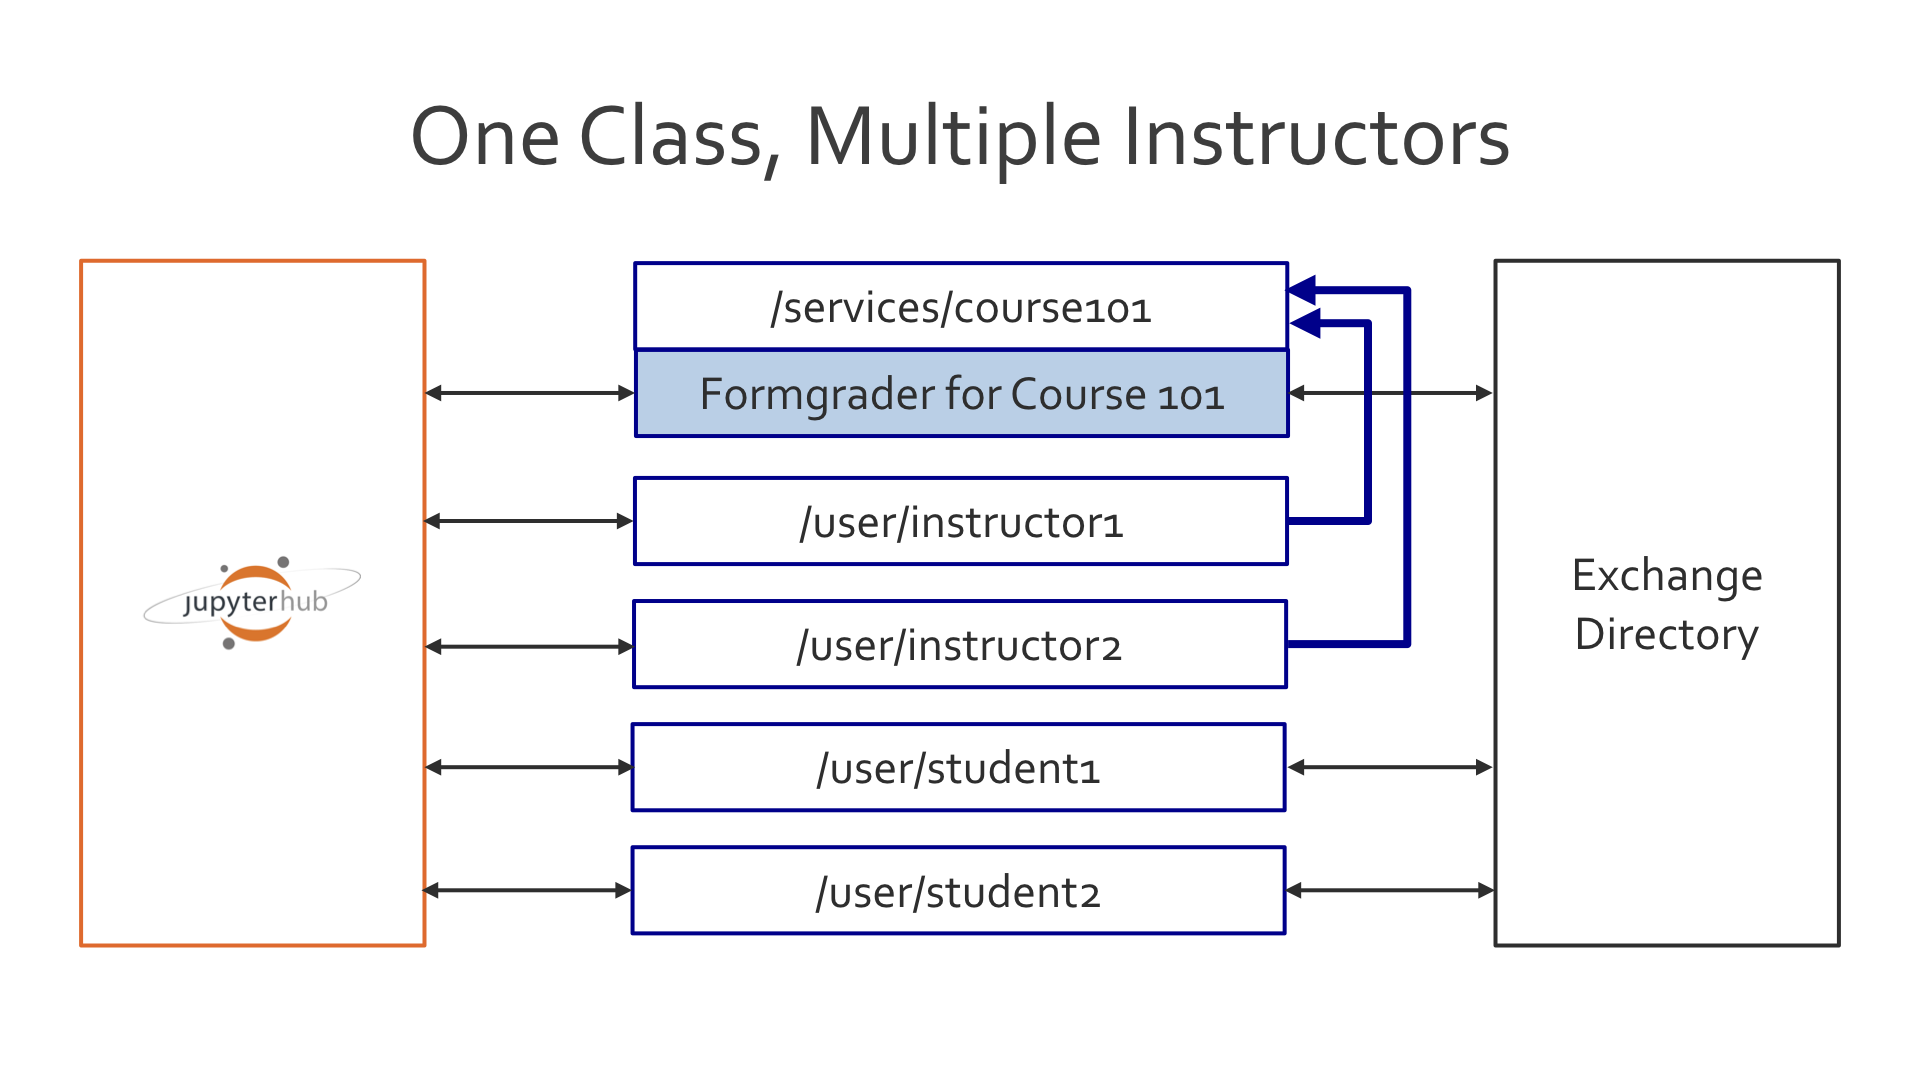 ../_images/one_class_multiple_instructors.png